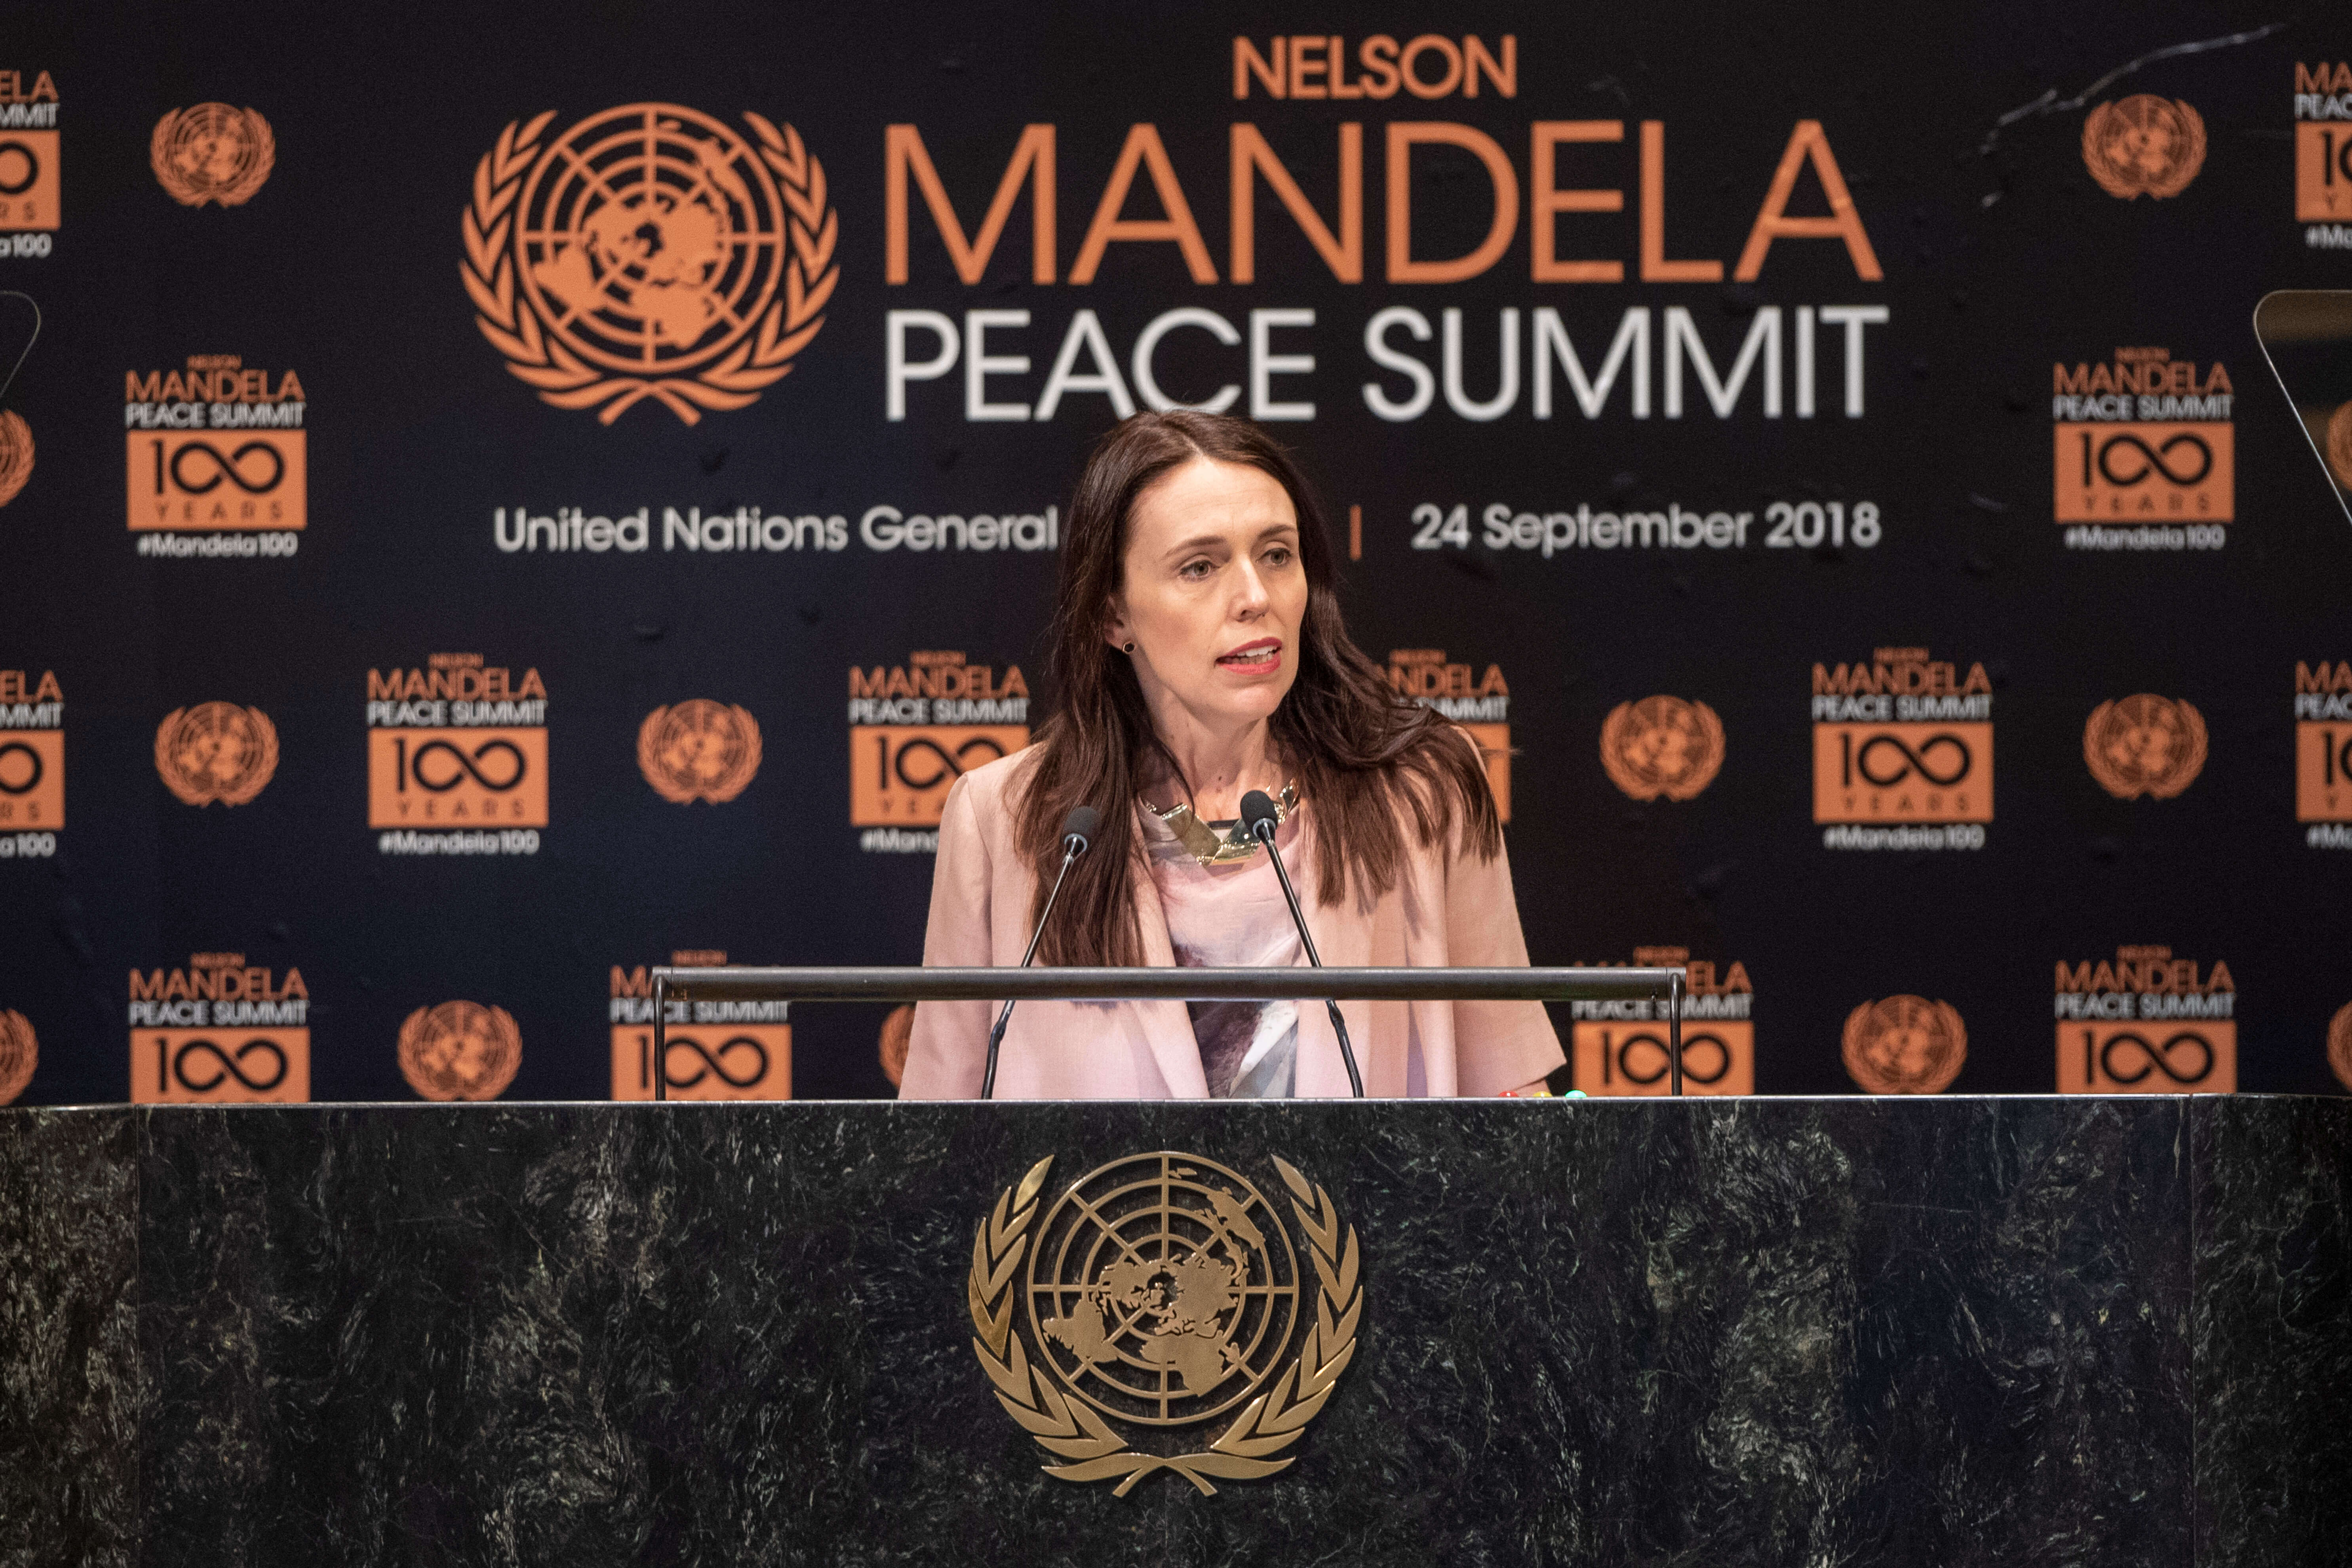 Jacinda Ardern, Prime Minister and Minister for Arts, Culture and Heritage, and National Security and Intelligence of New Zealand, makes remarks during the Nelson Mandela Peace Summit in September 2018. Source: UN Photo